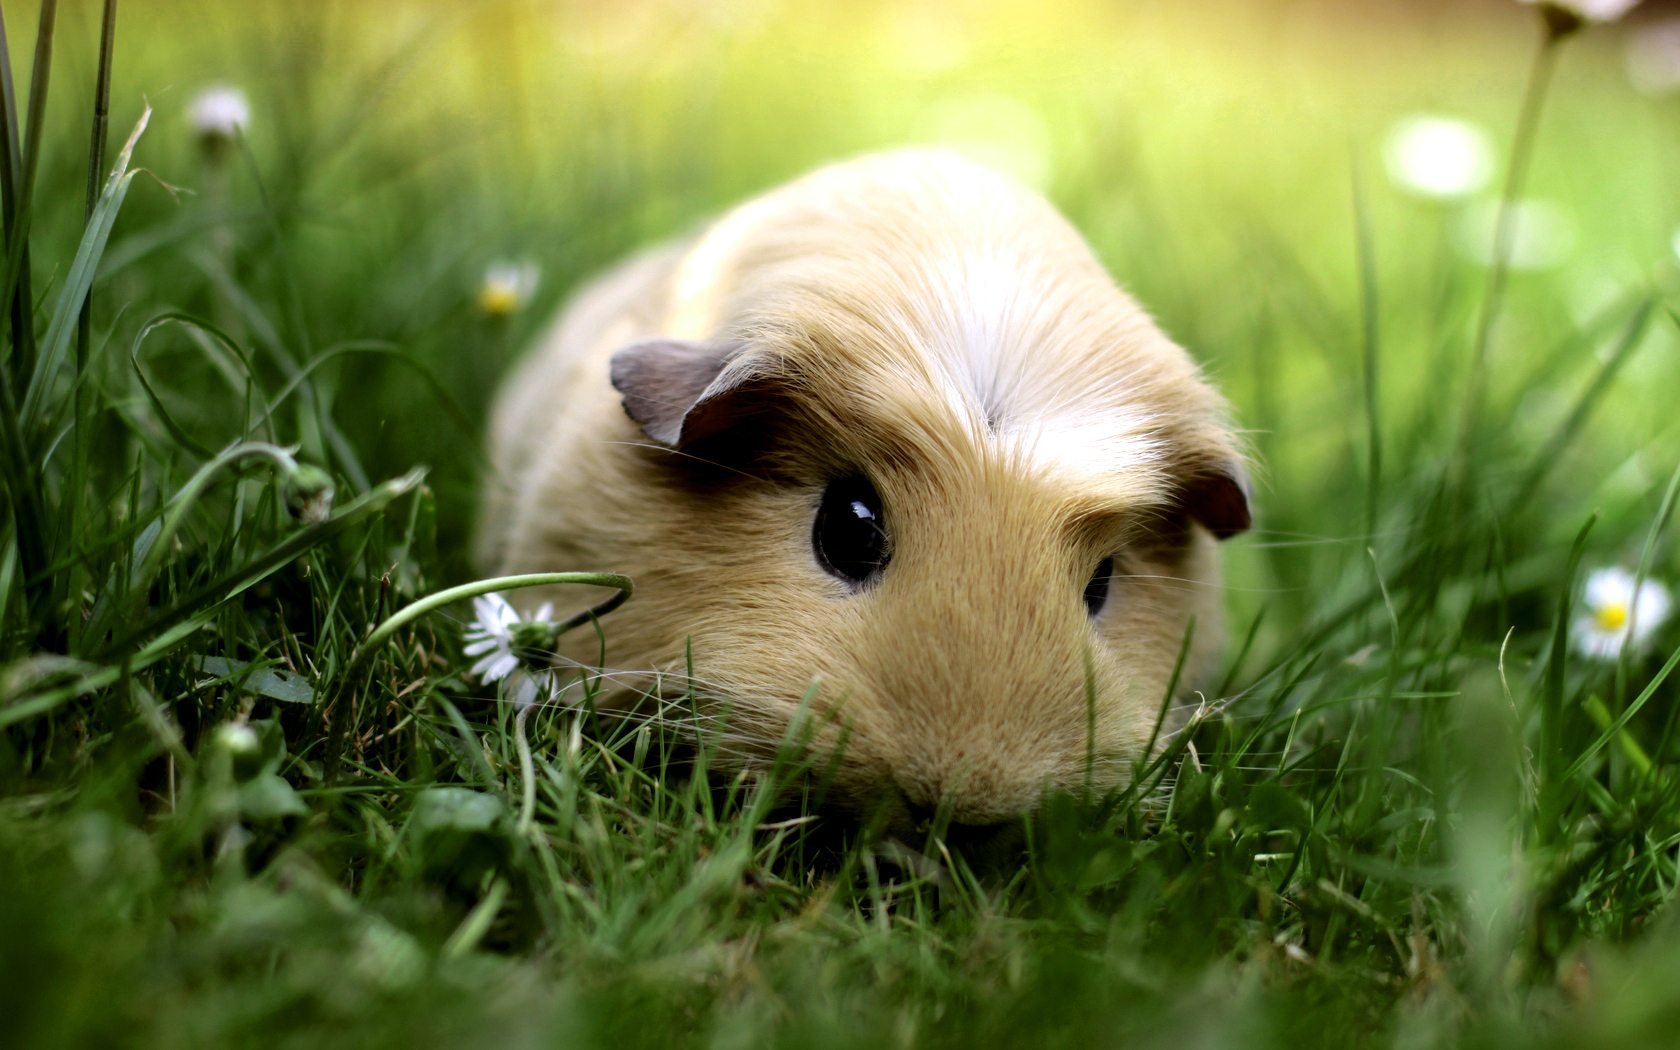 Cute Baby Pigs 11121 Hd Wallpapers in Animals   Imagescicom